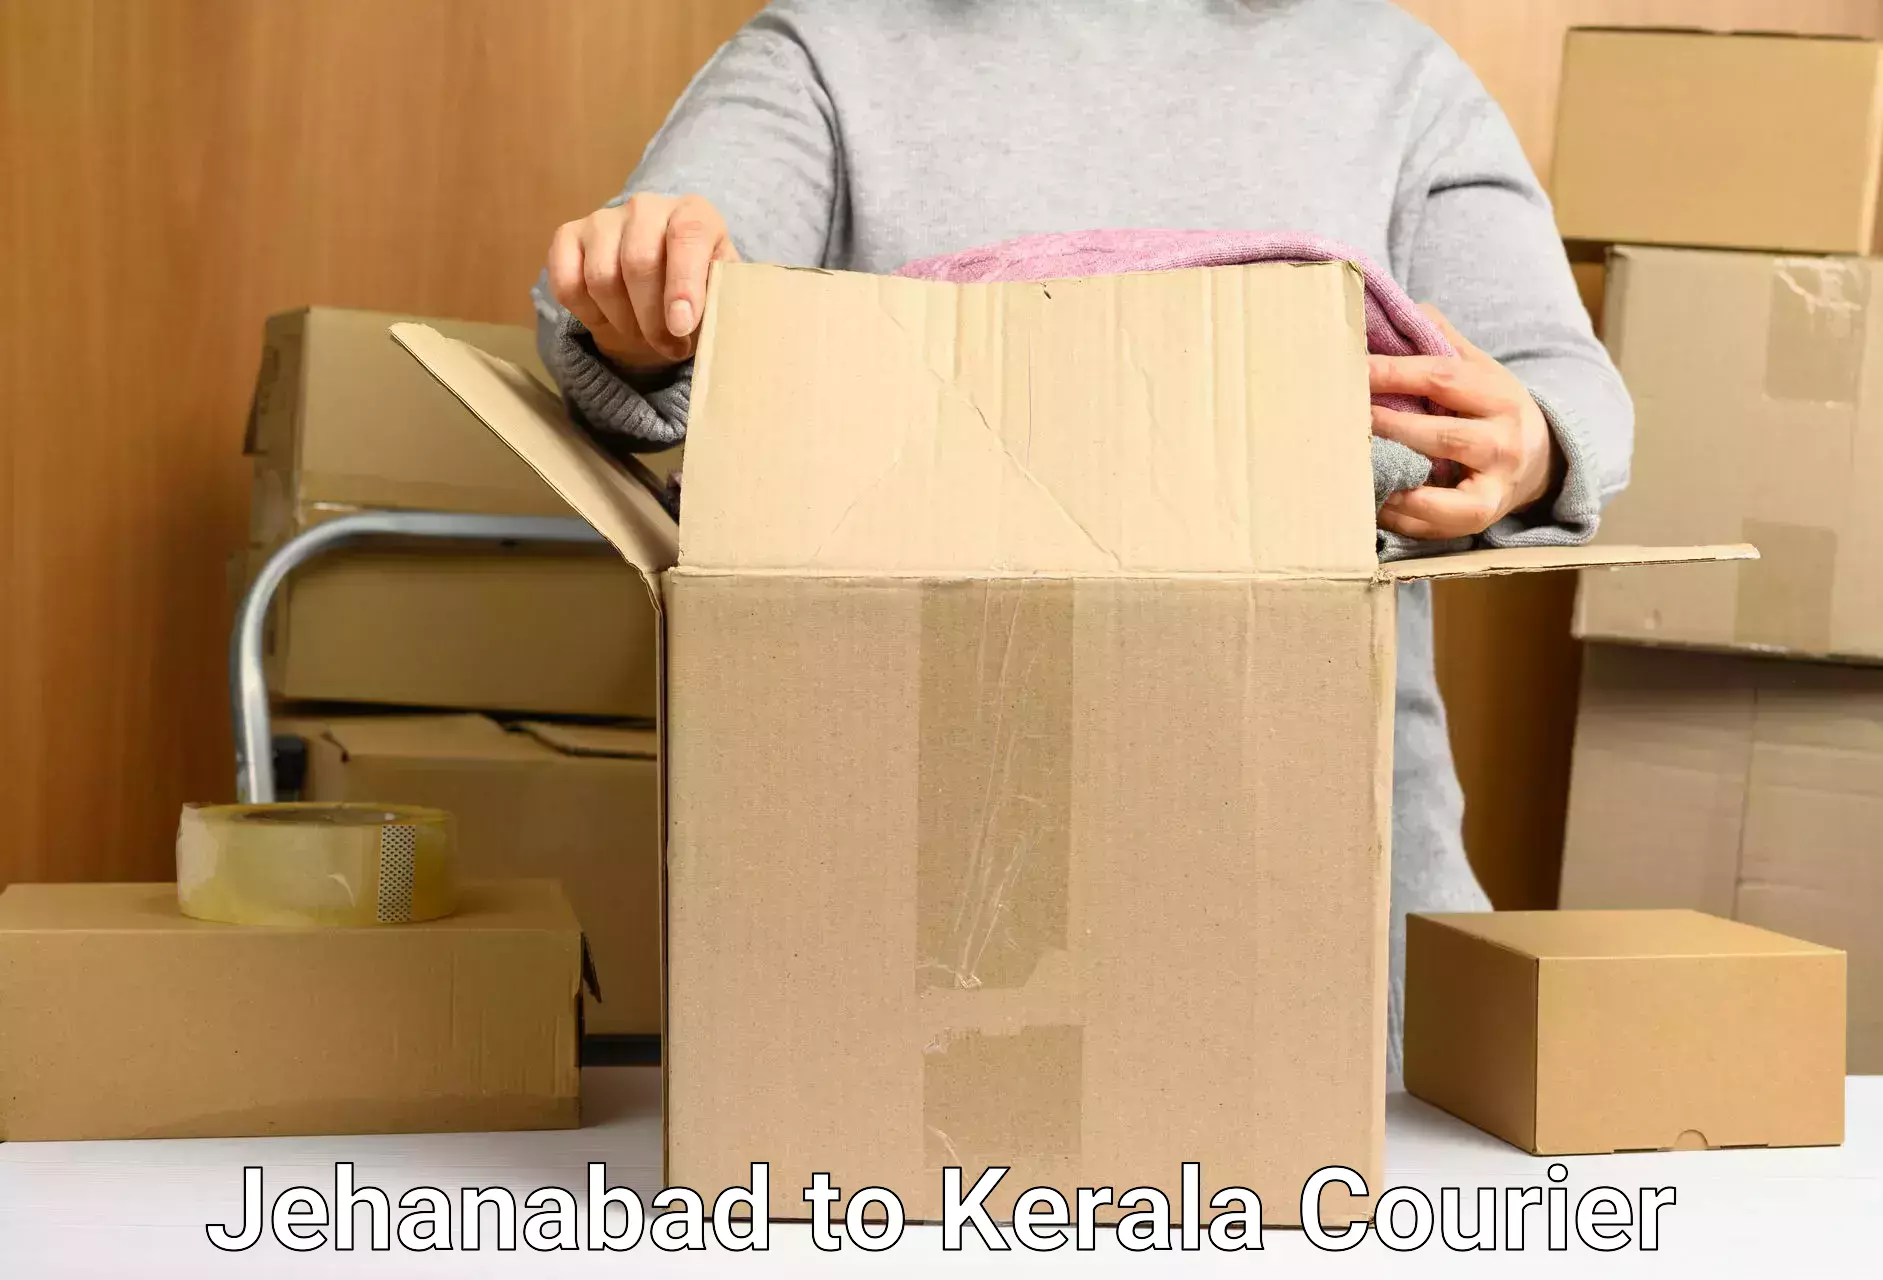 Affordable parcel service Jehanabad to Cochin Port Kochi